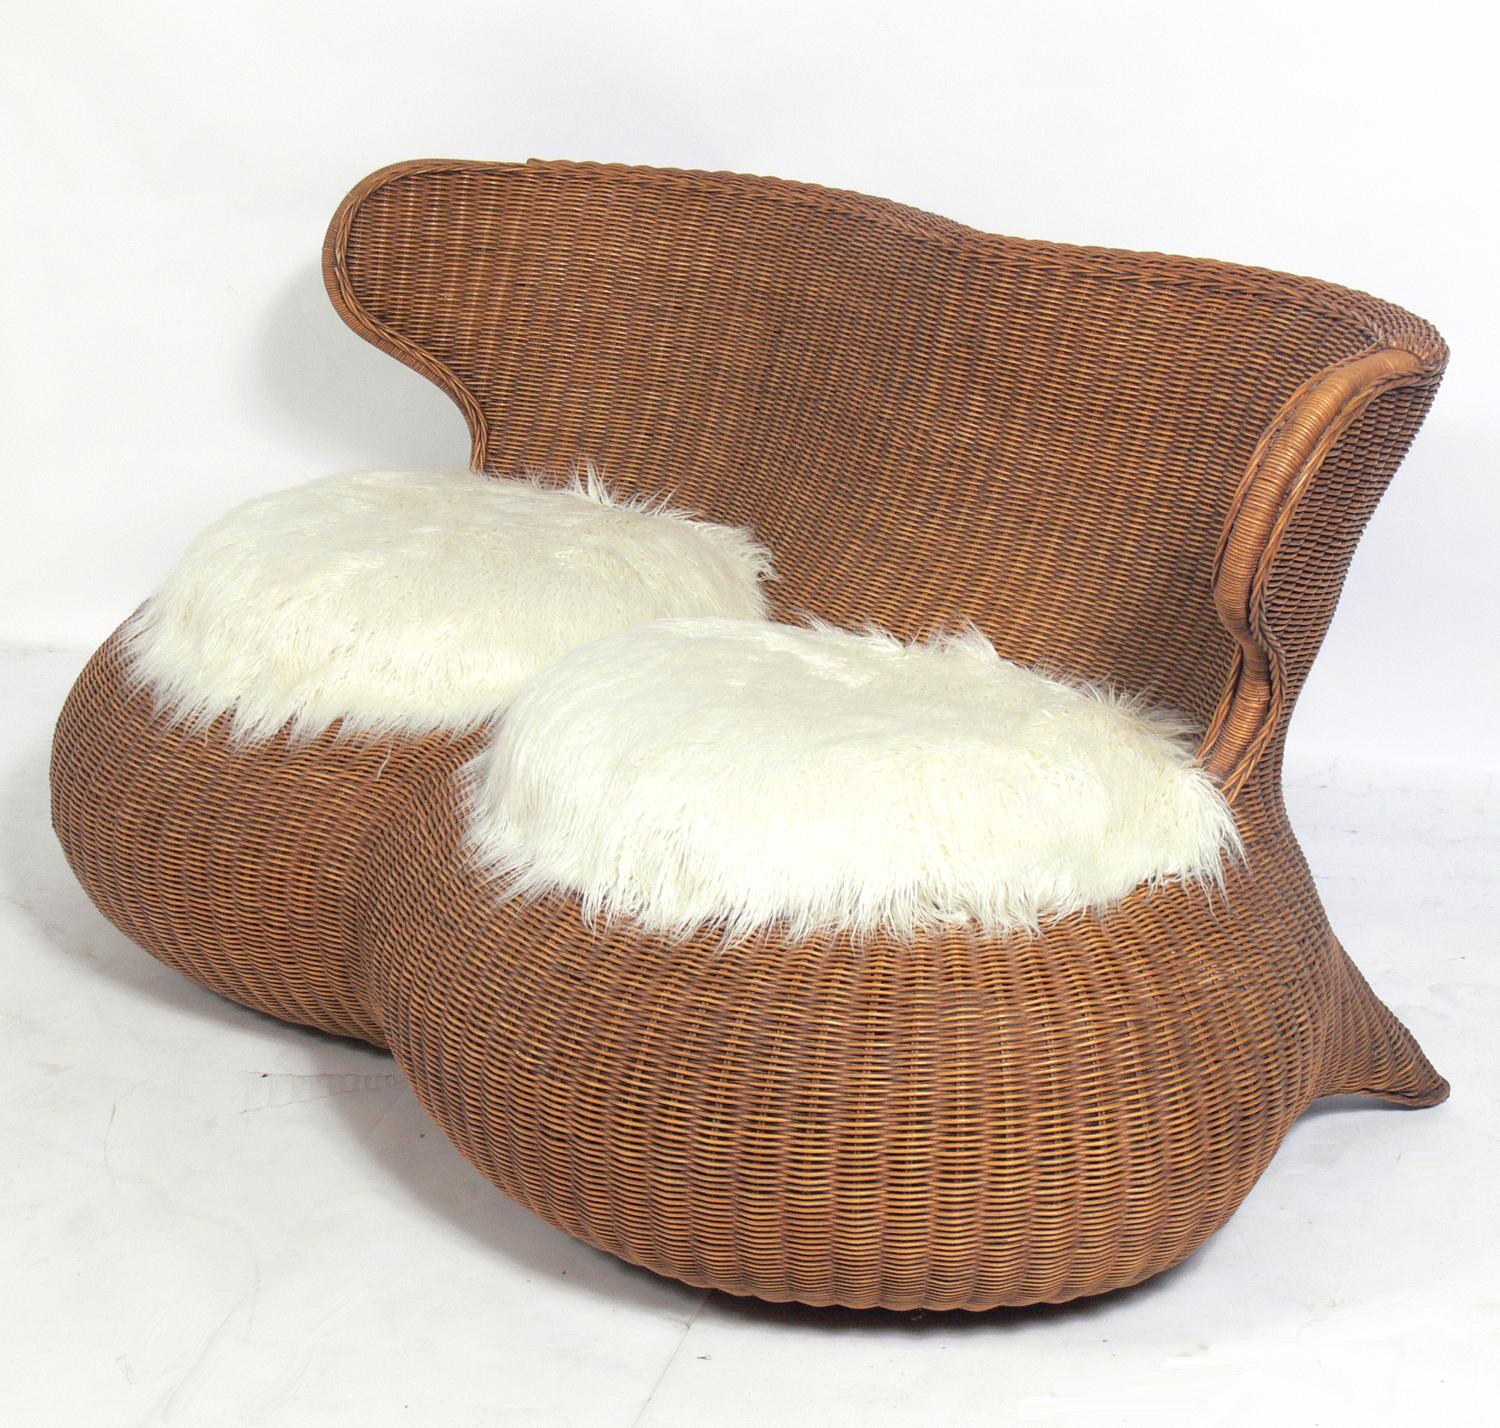 Sculptural Rattan Settee, in the manner of Isamu Kenmochi, circa 1960s. It retains it's warm original patina. It has been recently reupholstered in a plush faux mongolian sheepskin.